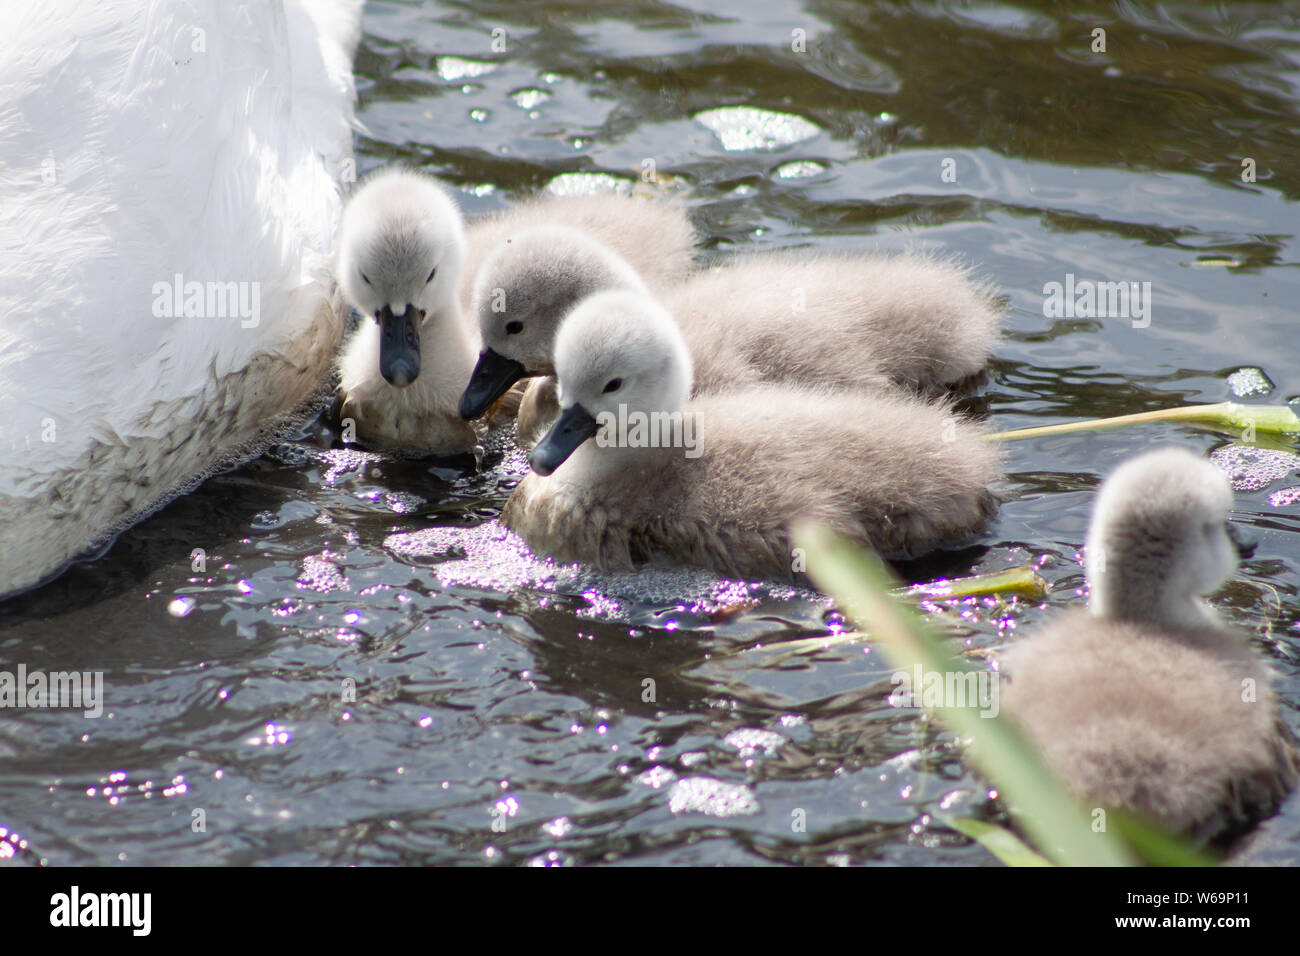 SWANS WITH SYGNETS Stock Photo